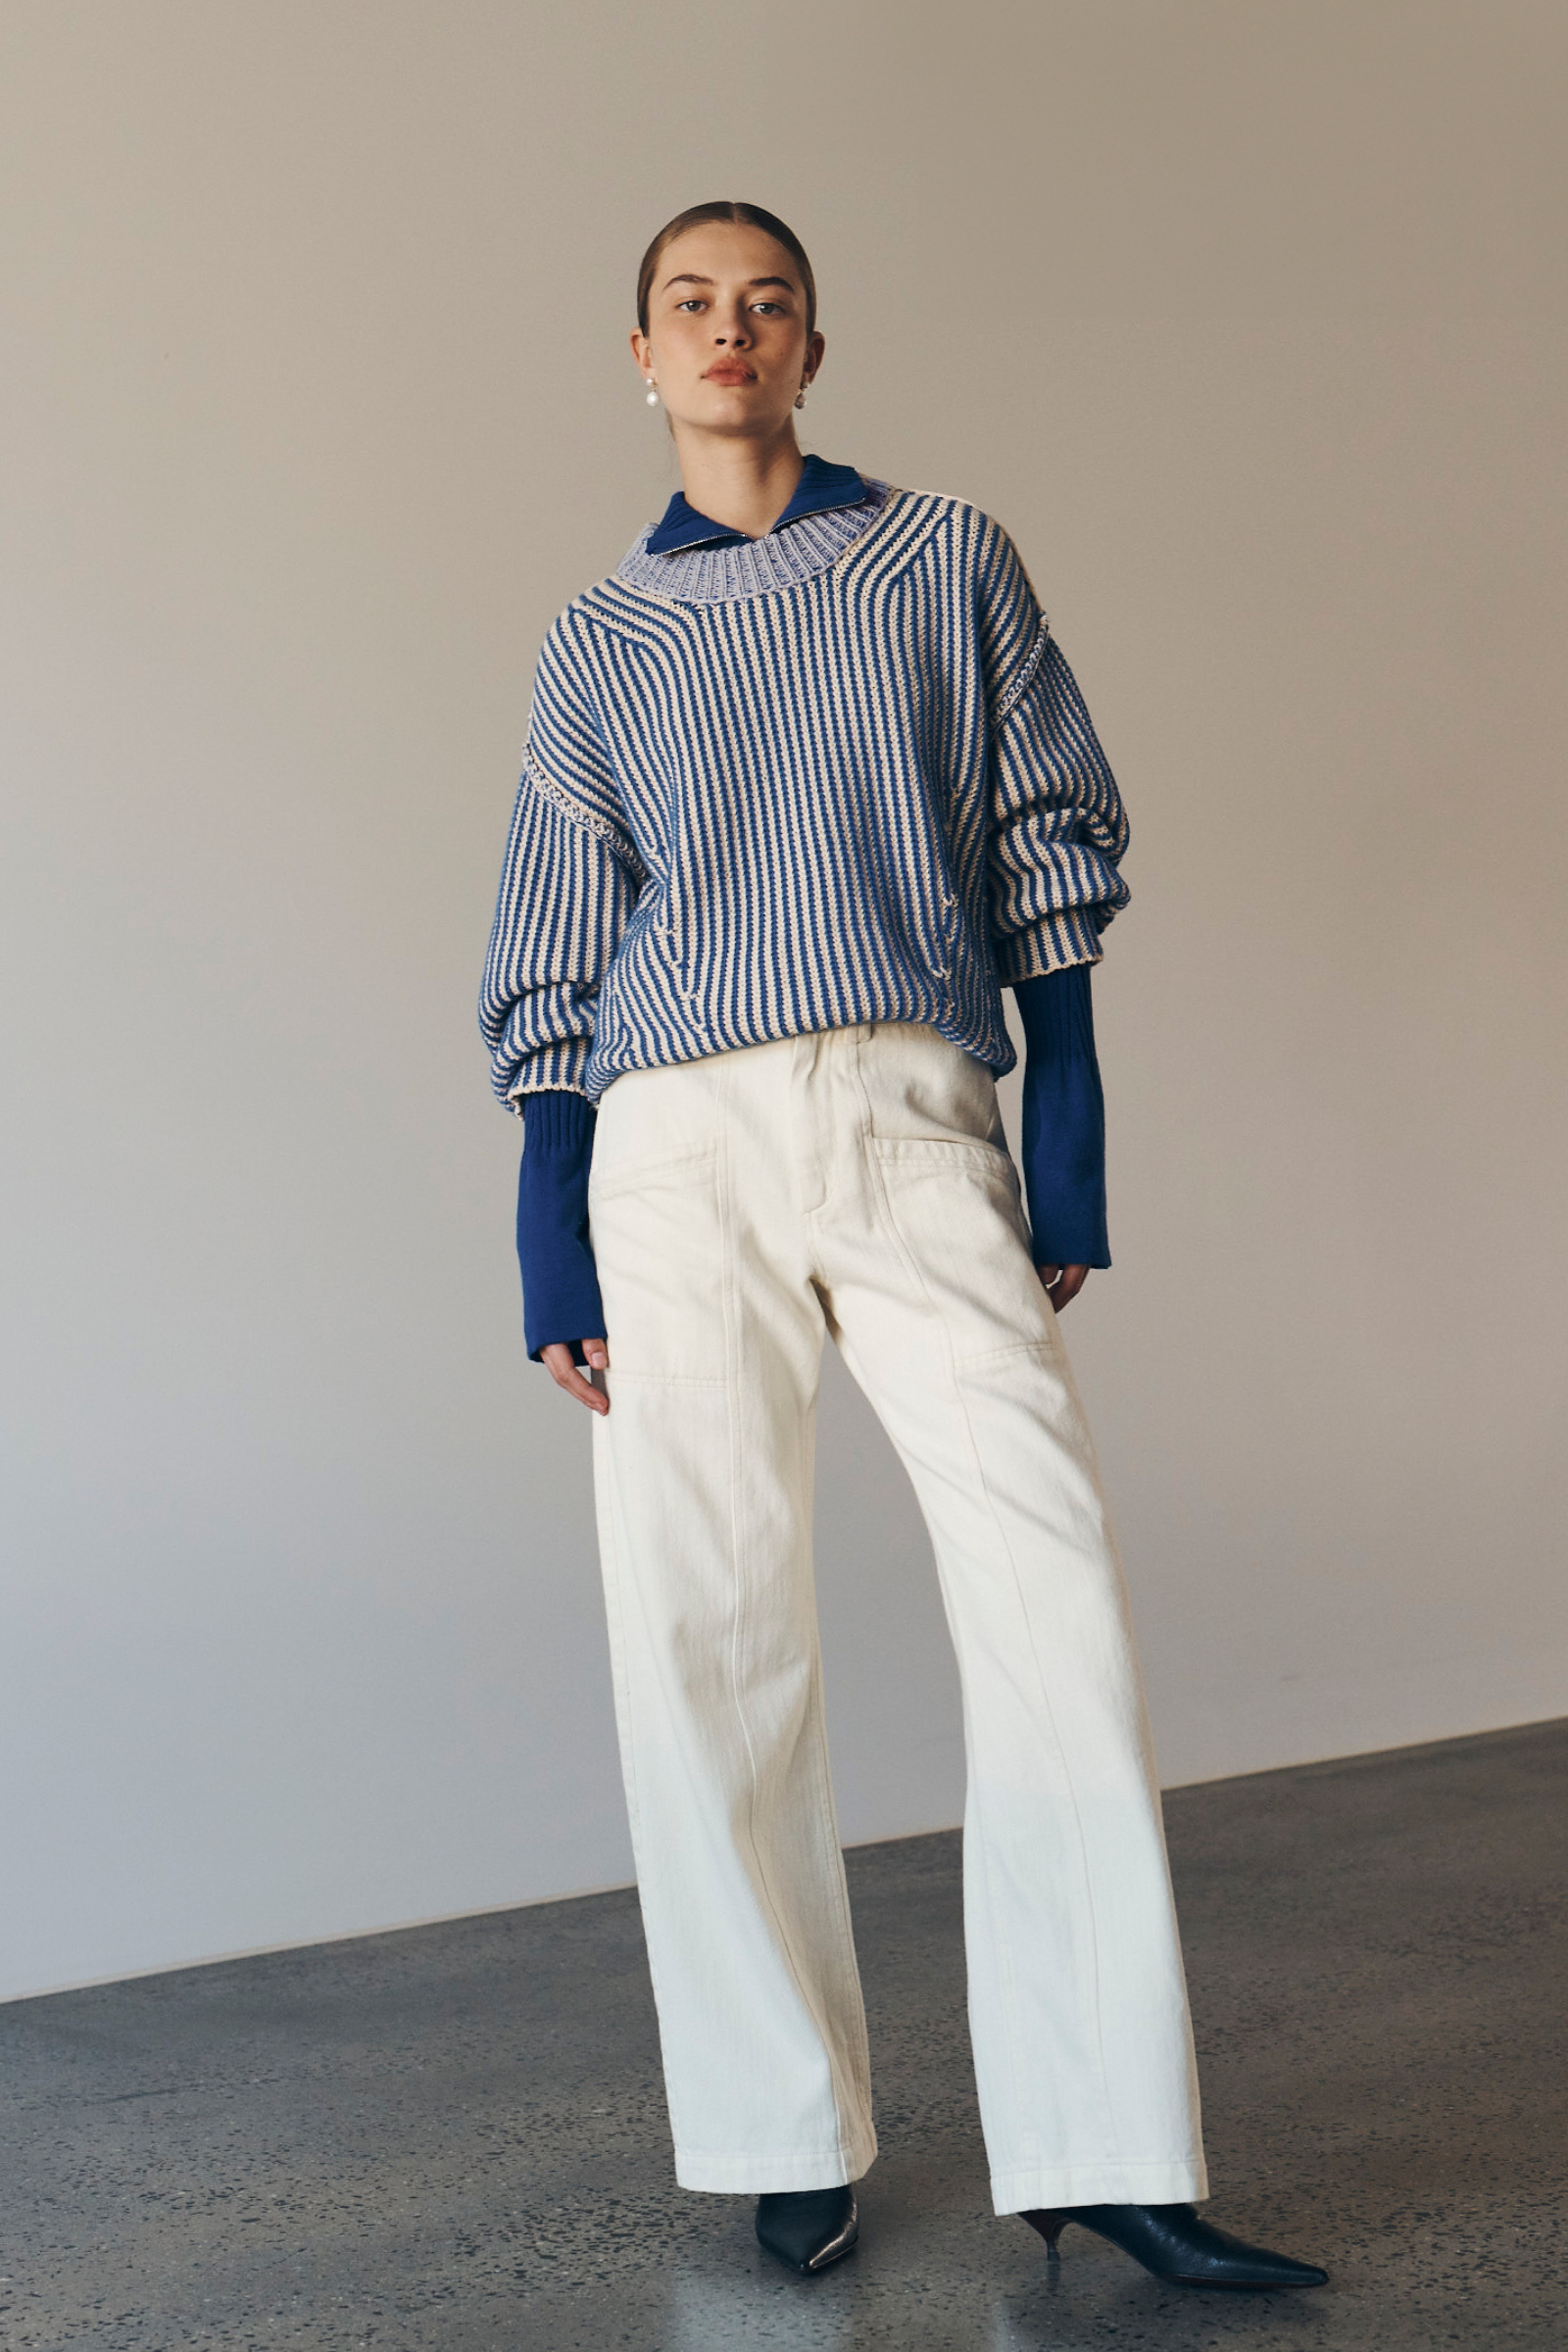 Bianca wears the Tish Knit Jumper in Cobalt over the Travis Zip Knit Top in Cobalt paired with the Gio Jeans in Cream. She accessorises with pearl drop earrings and completes the look with a low, slick bun. 